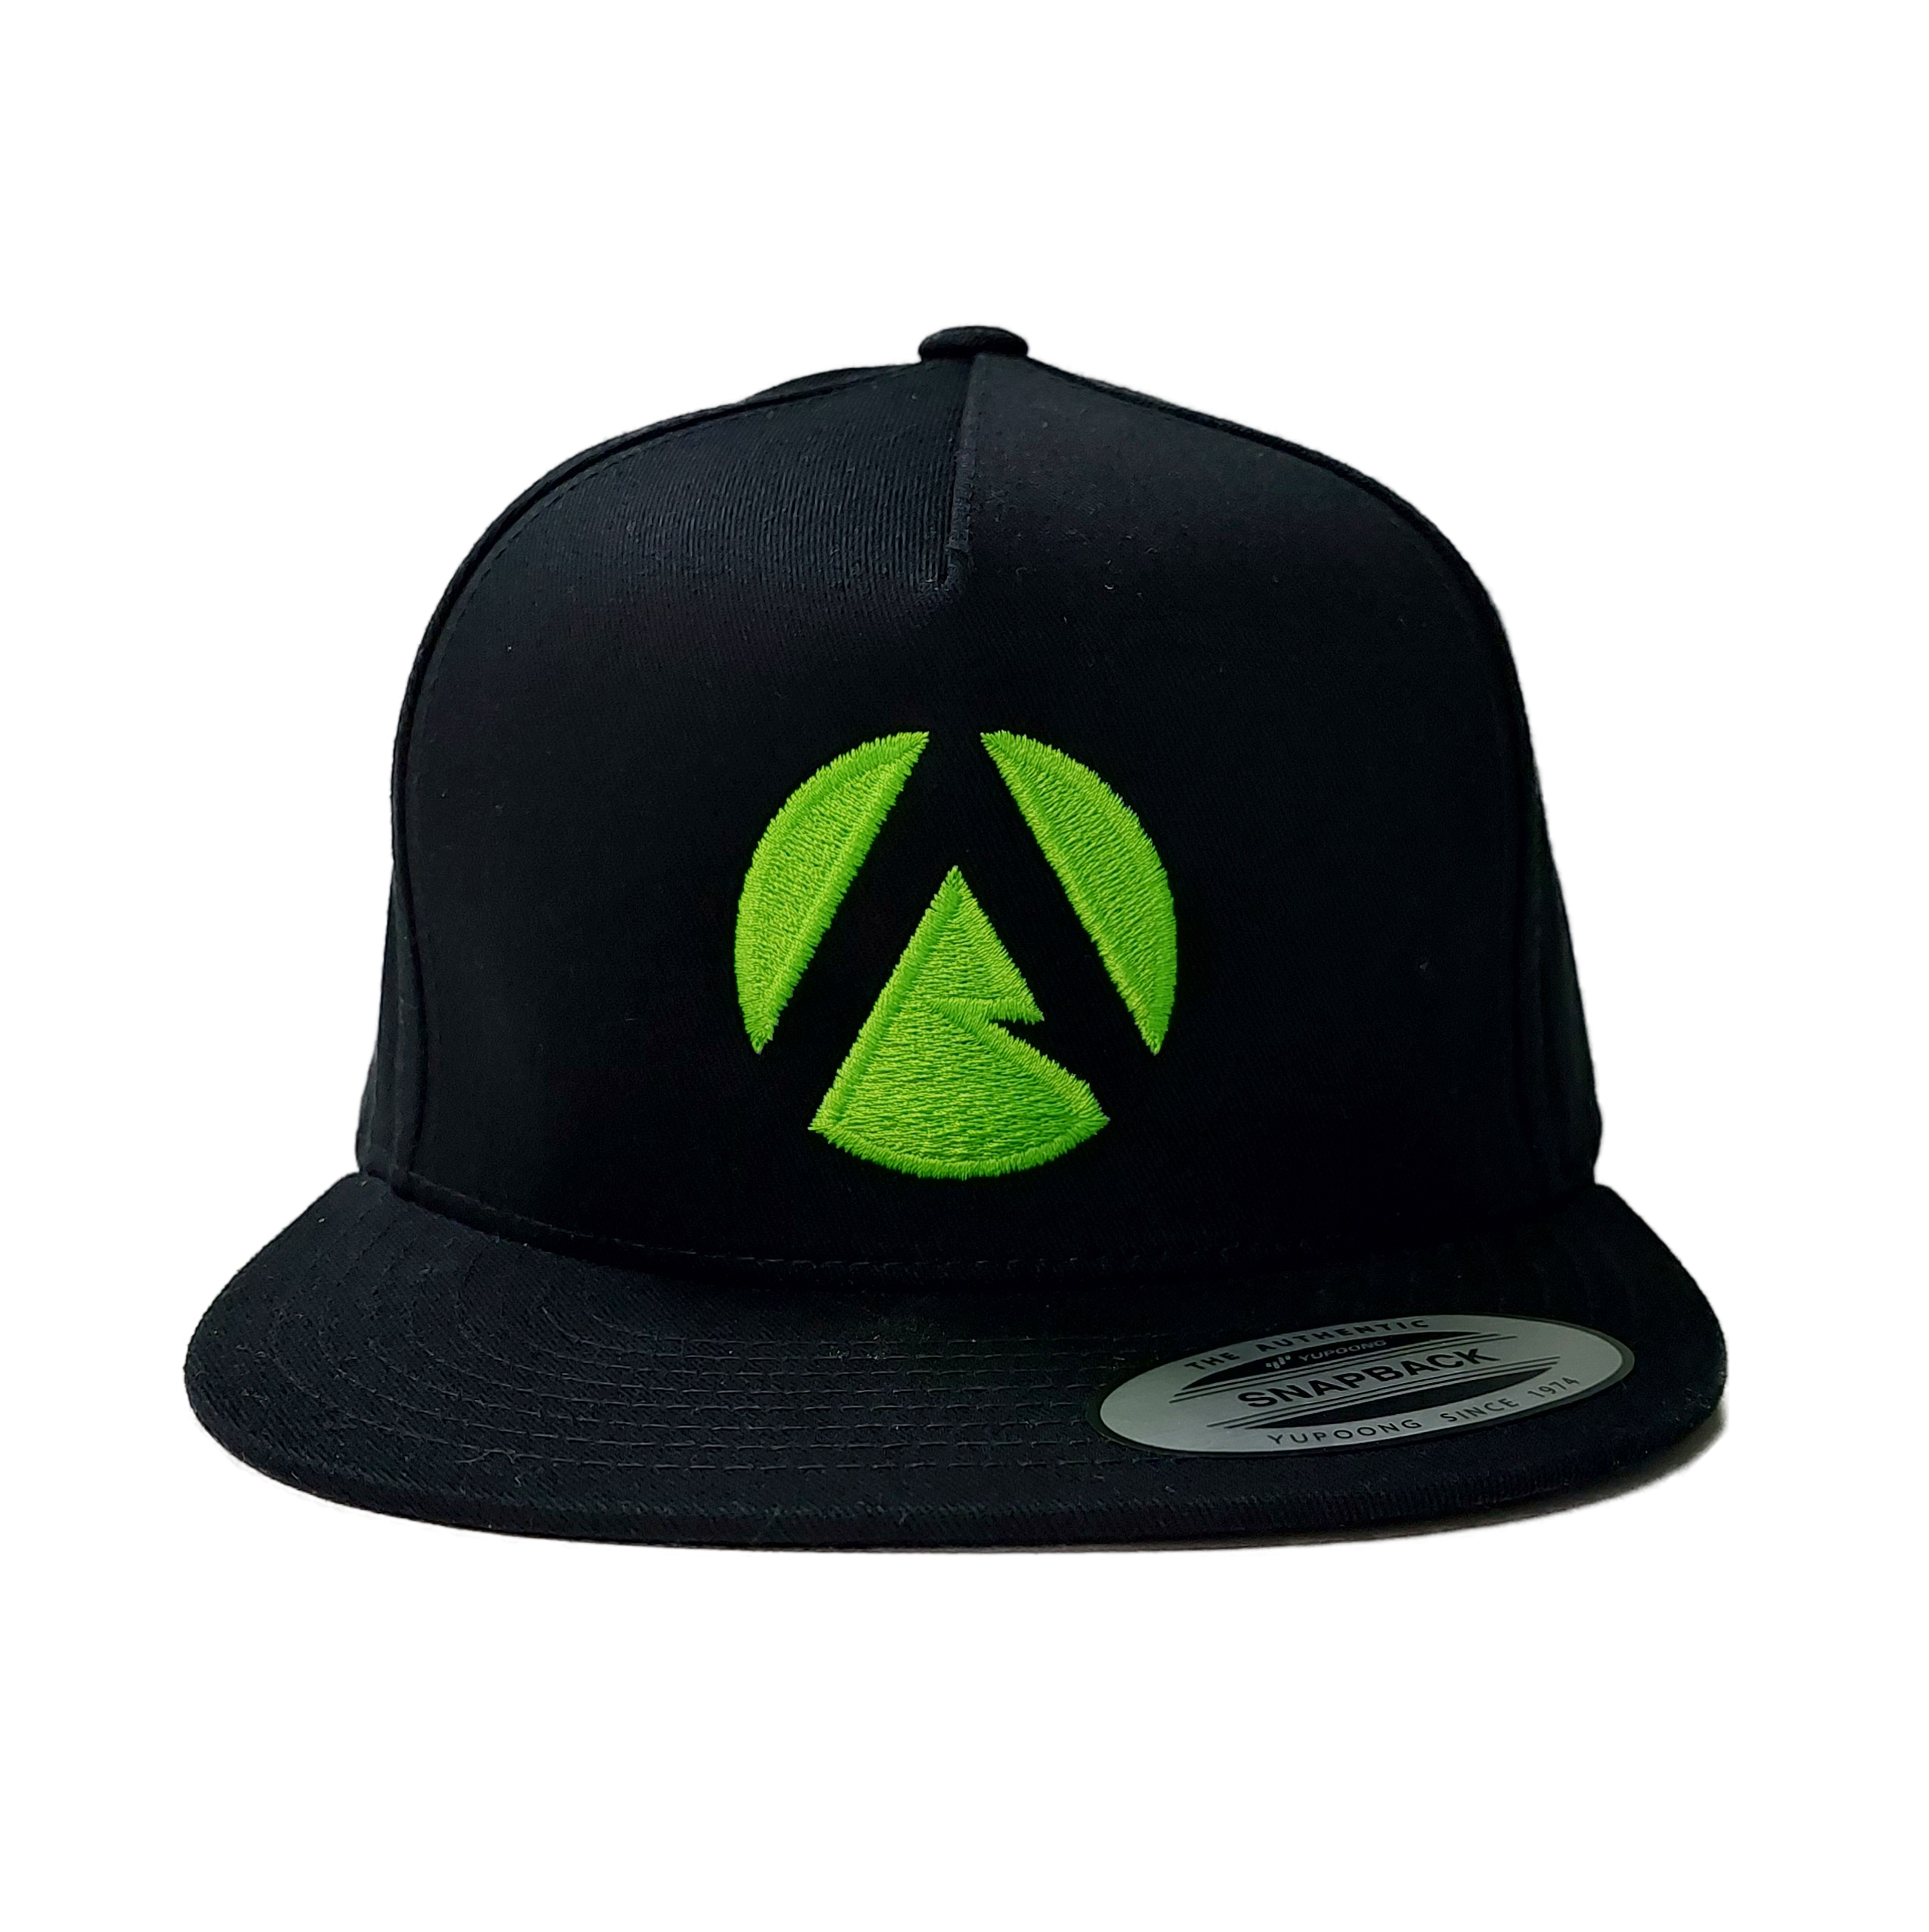 AT051 - Baseball Cap Classic Shape Front Icon - Black/Lime